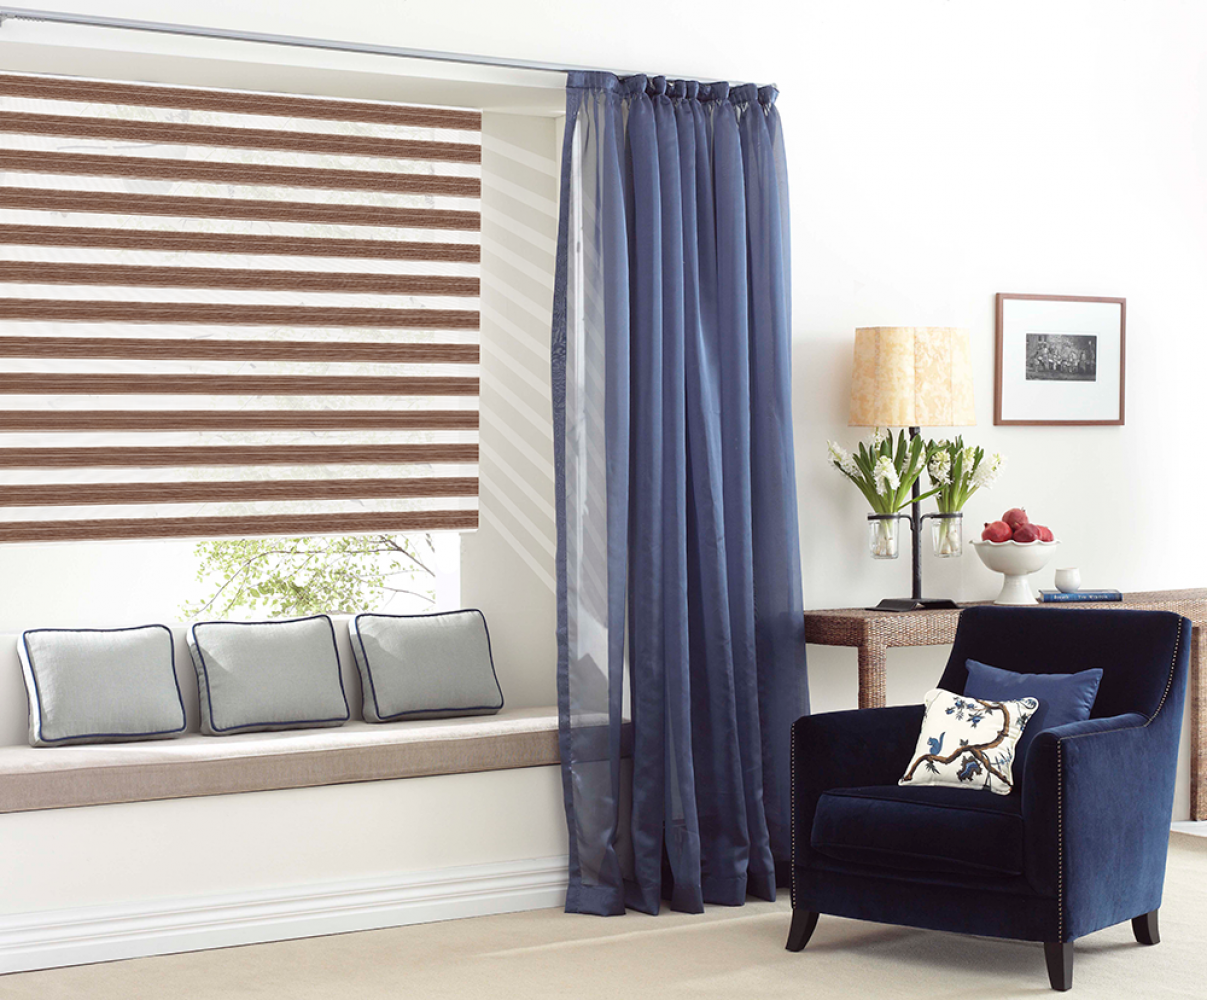 Make Your Home Stunning and Good Looking With Curtain and Blinds